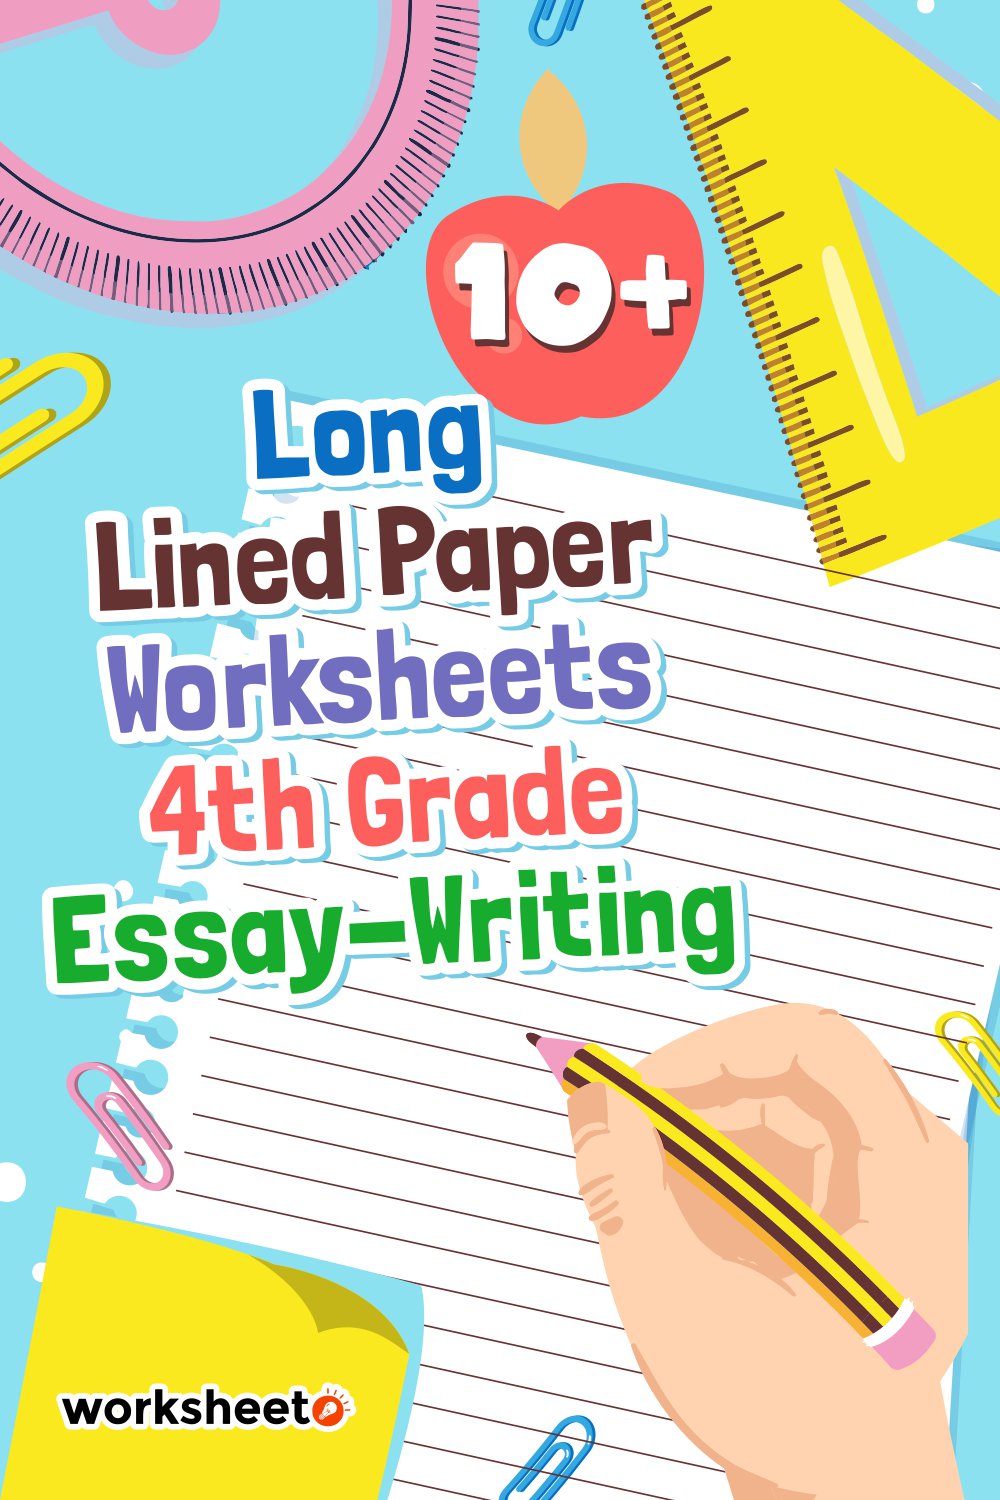 15 Images of Long Lined Paper Worksheets 4th Grade Essay-Writing